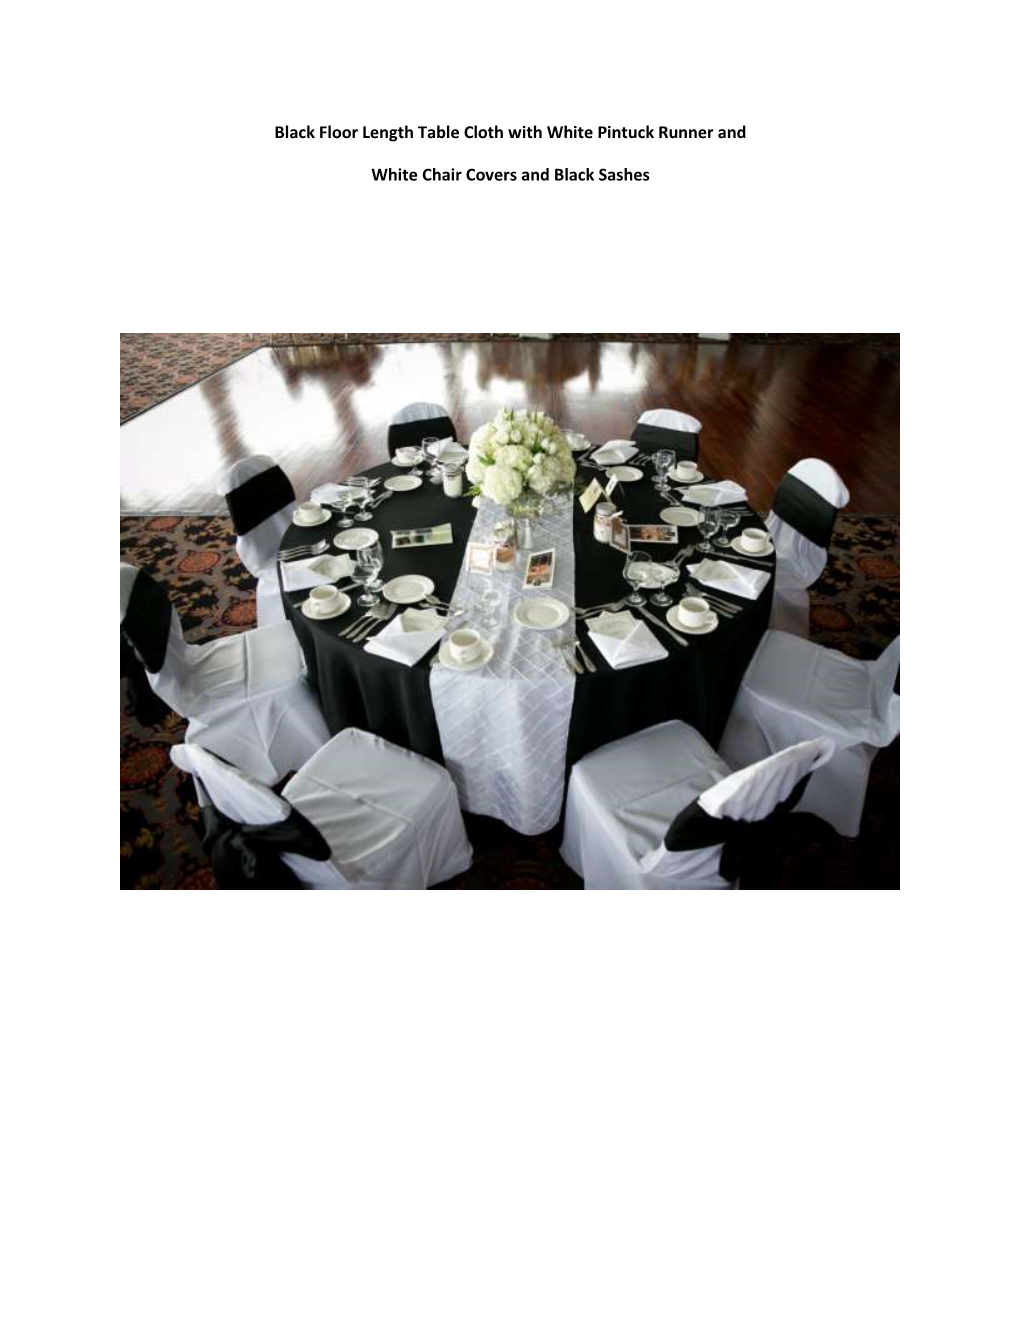 Black Floor Length Table Cloth with White Pintuck Runner and White